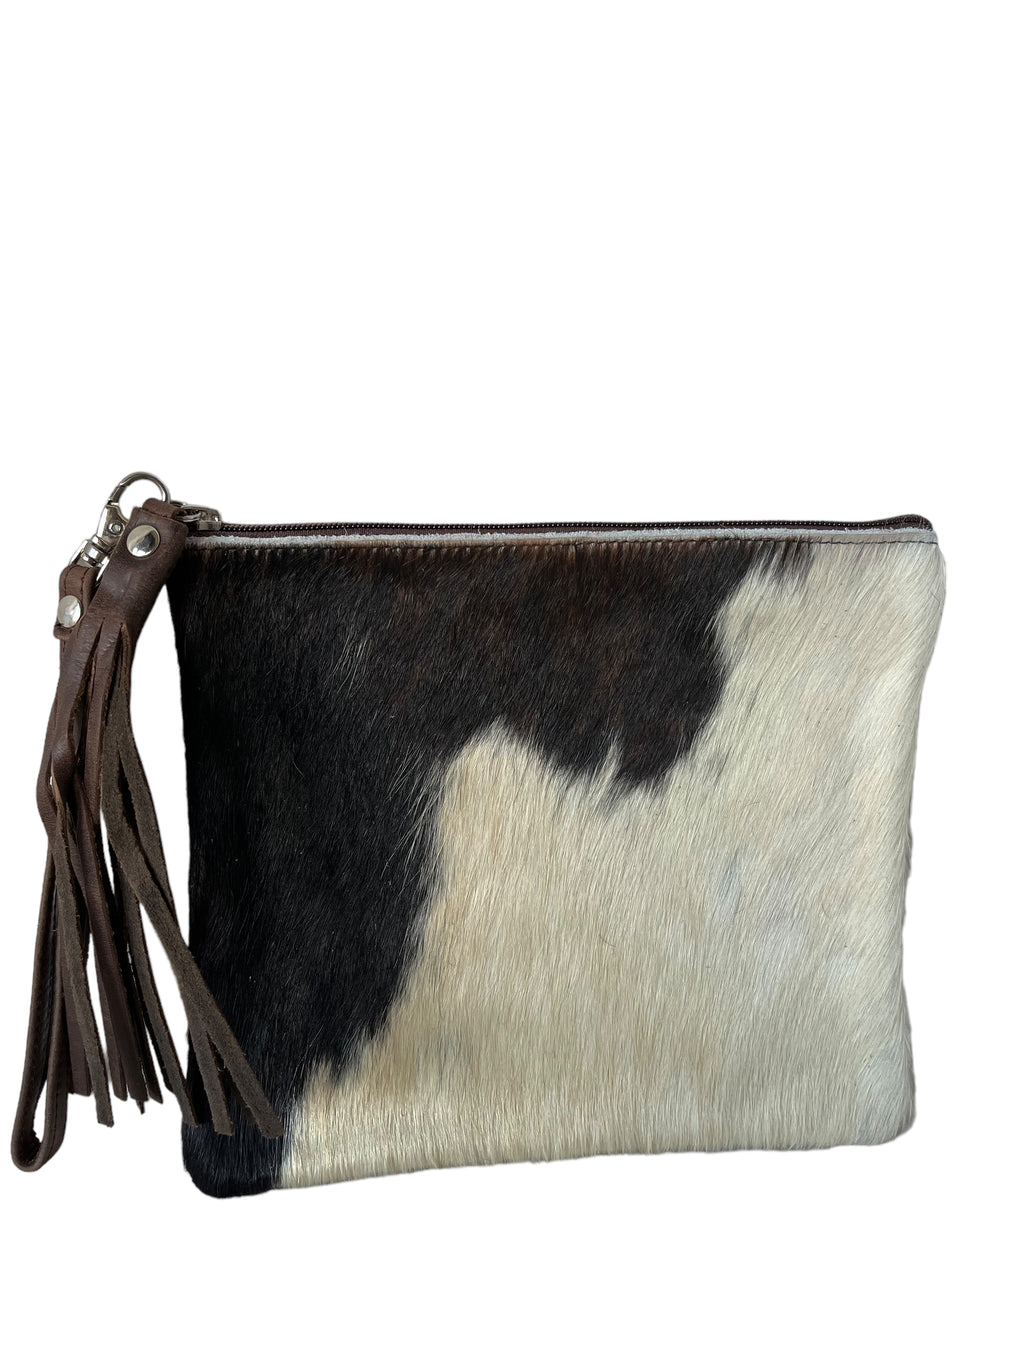 The Epsom Clutch - Brown & White Cowhide